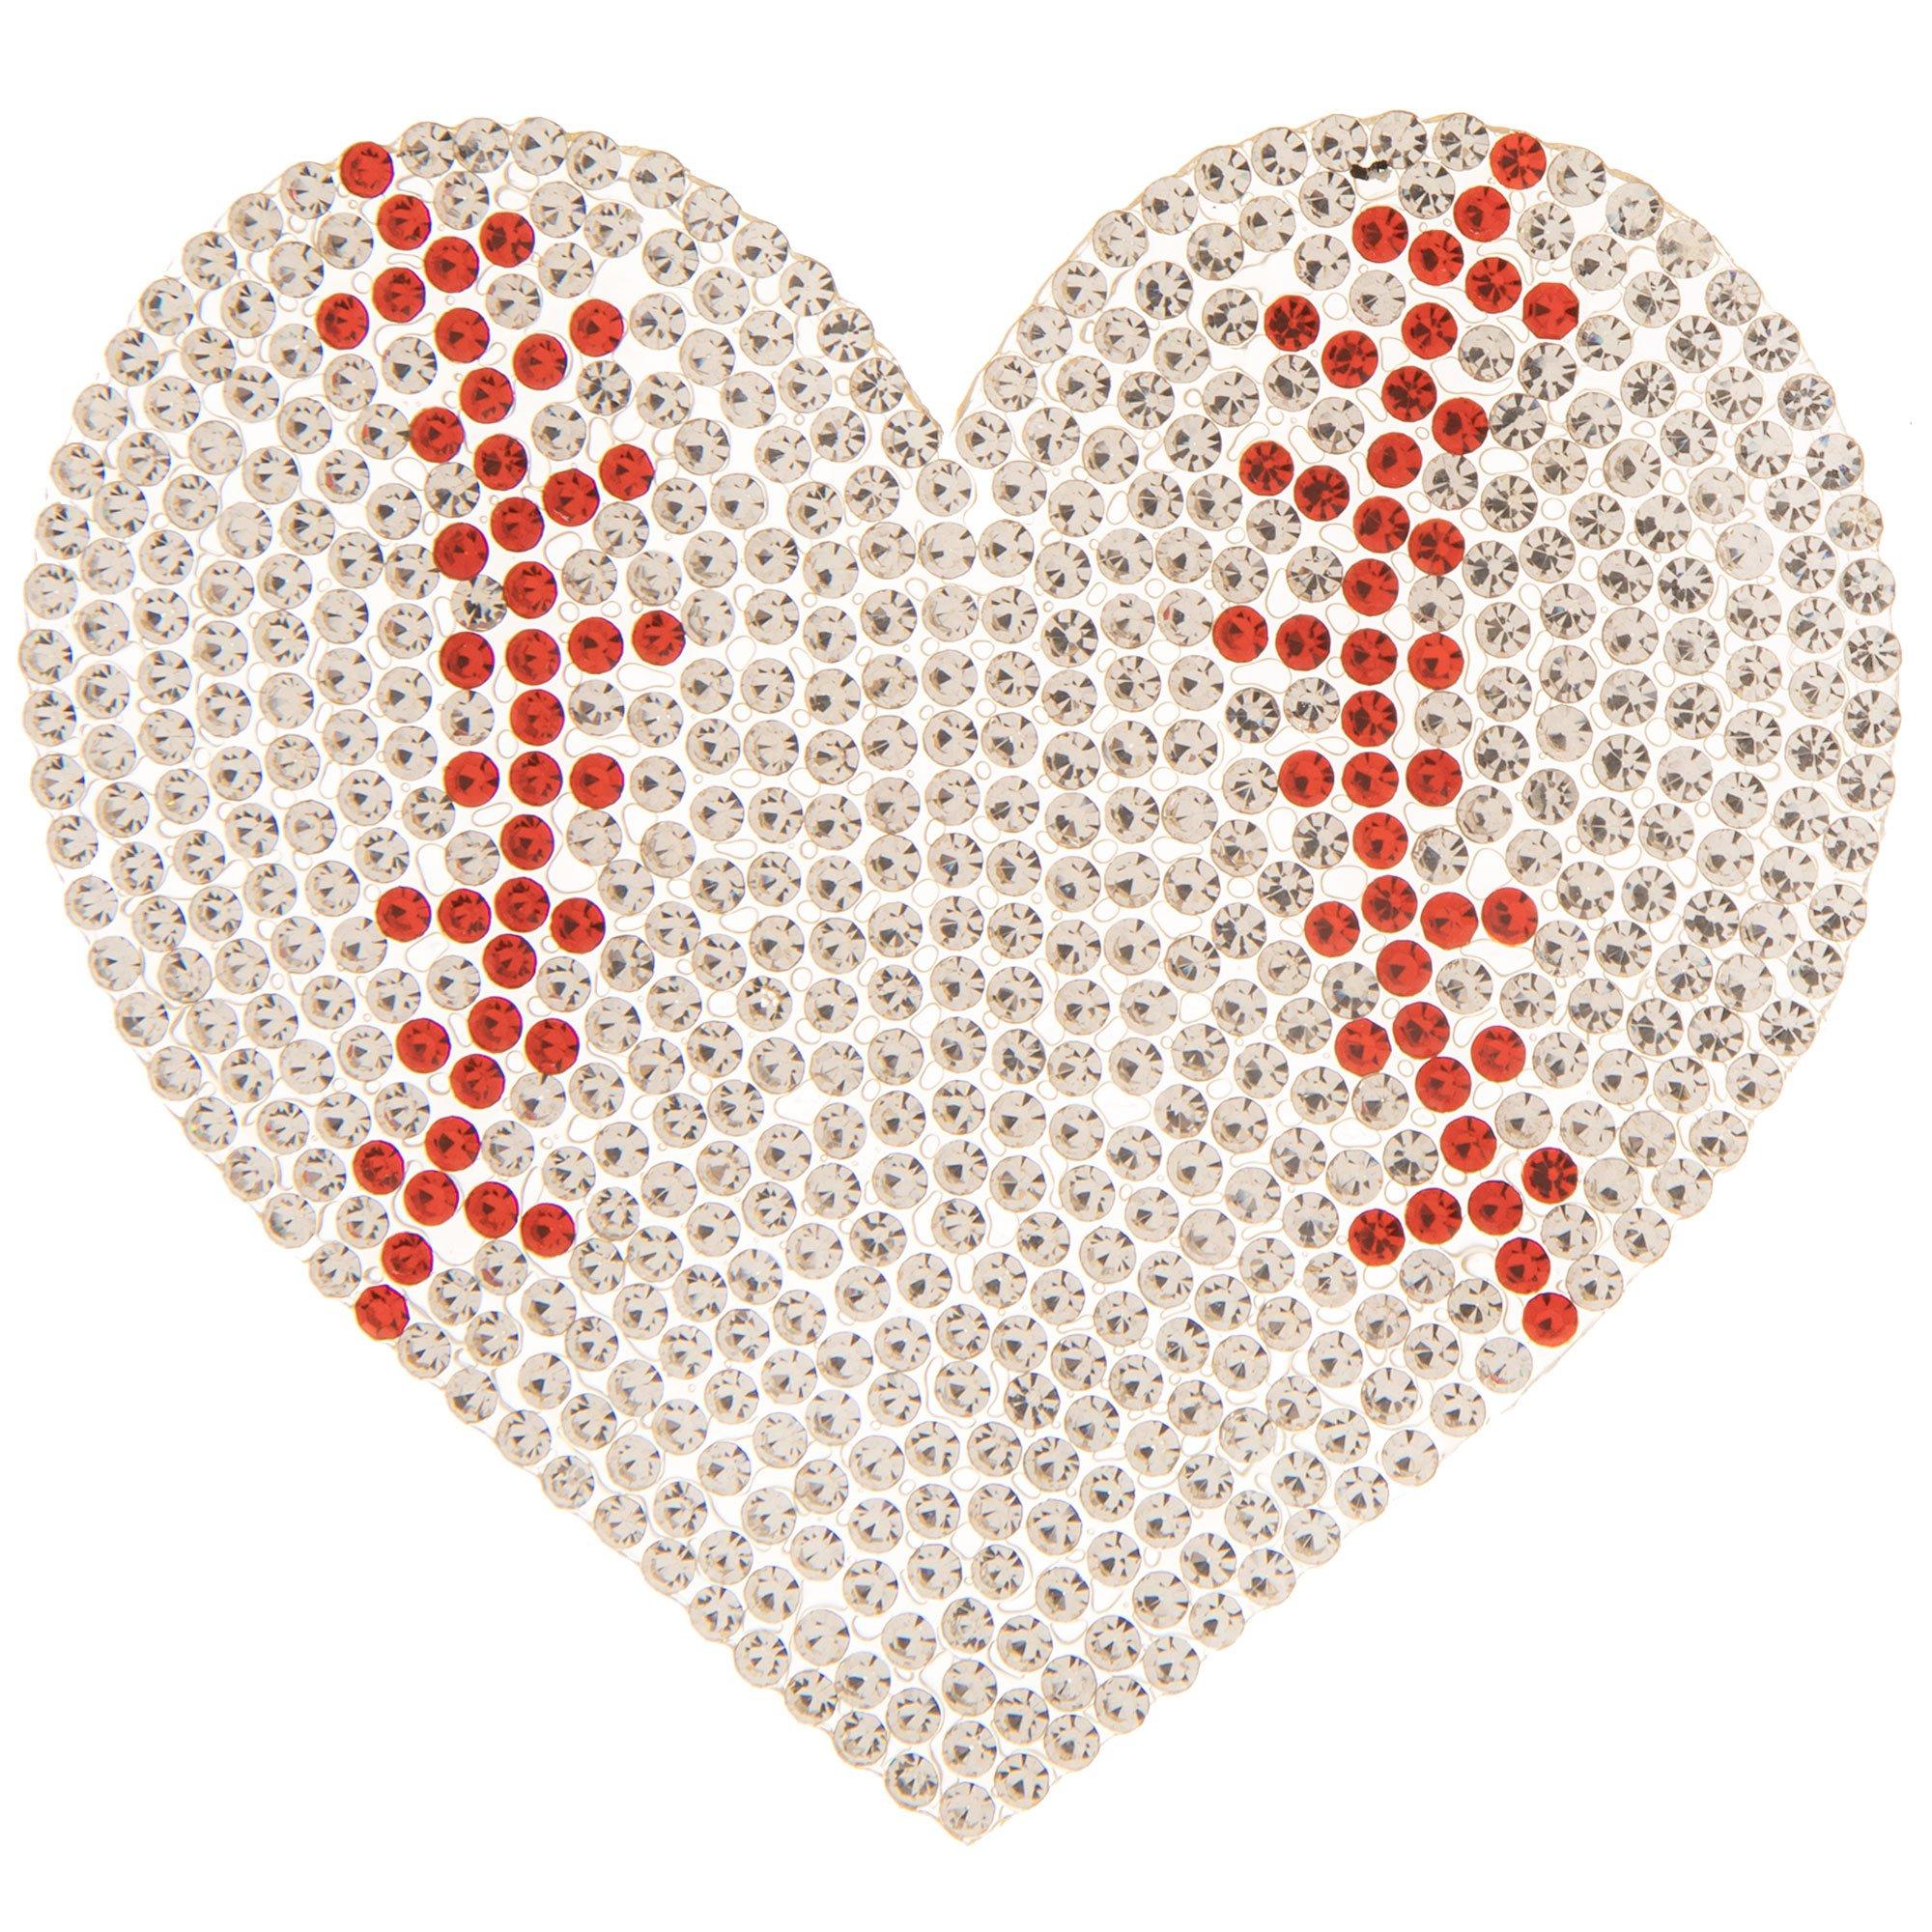  INFUNLY 30pcs Heart Iron On Patches Rhinestone Patches  Appliques for Clothing Heart Crystal Bling Applique Embroidered Patches for  DIY Crafts Clothes Bag Pants Decoration : Arts, Crafts & Sewing